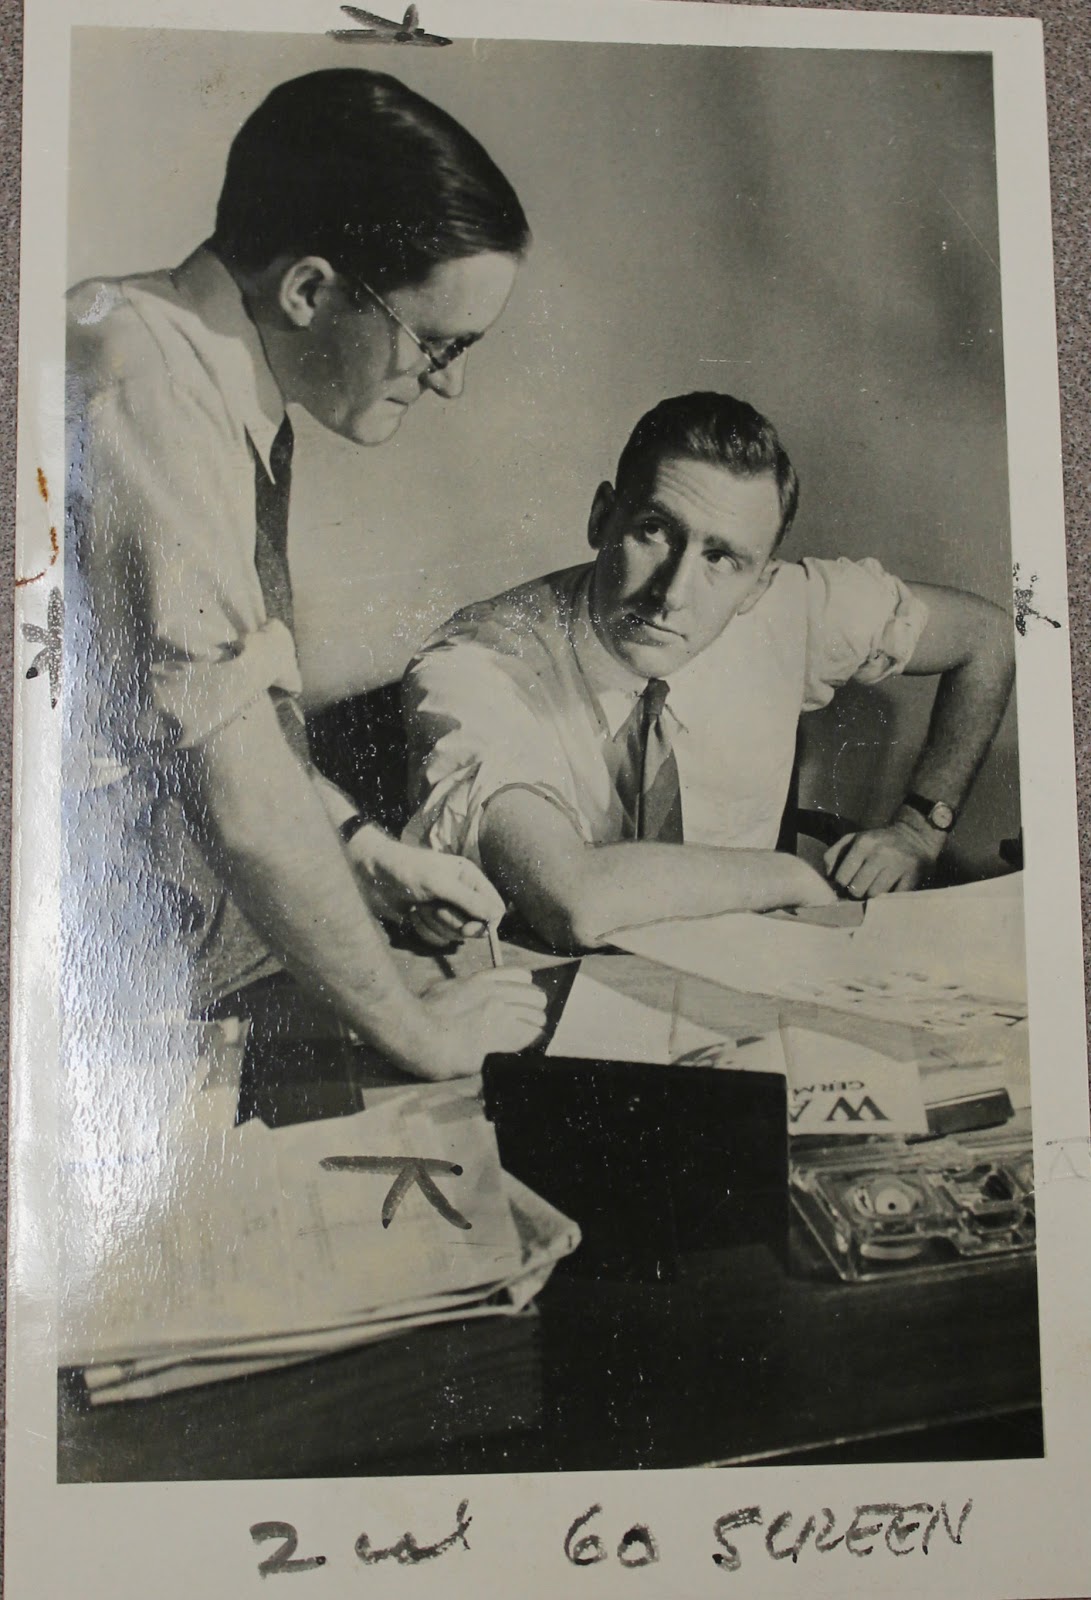 A black and white photograph of Michael Sayers on the left and Albert Kahn on the right